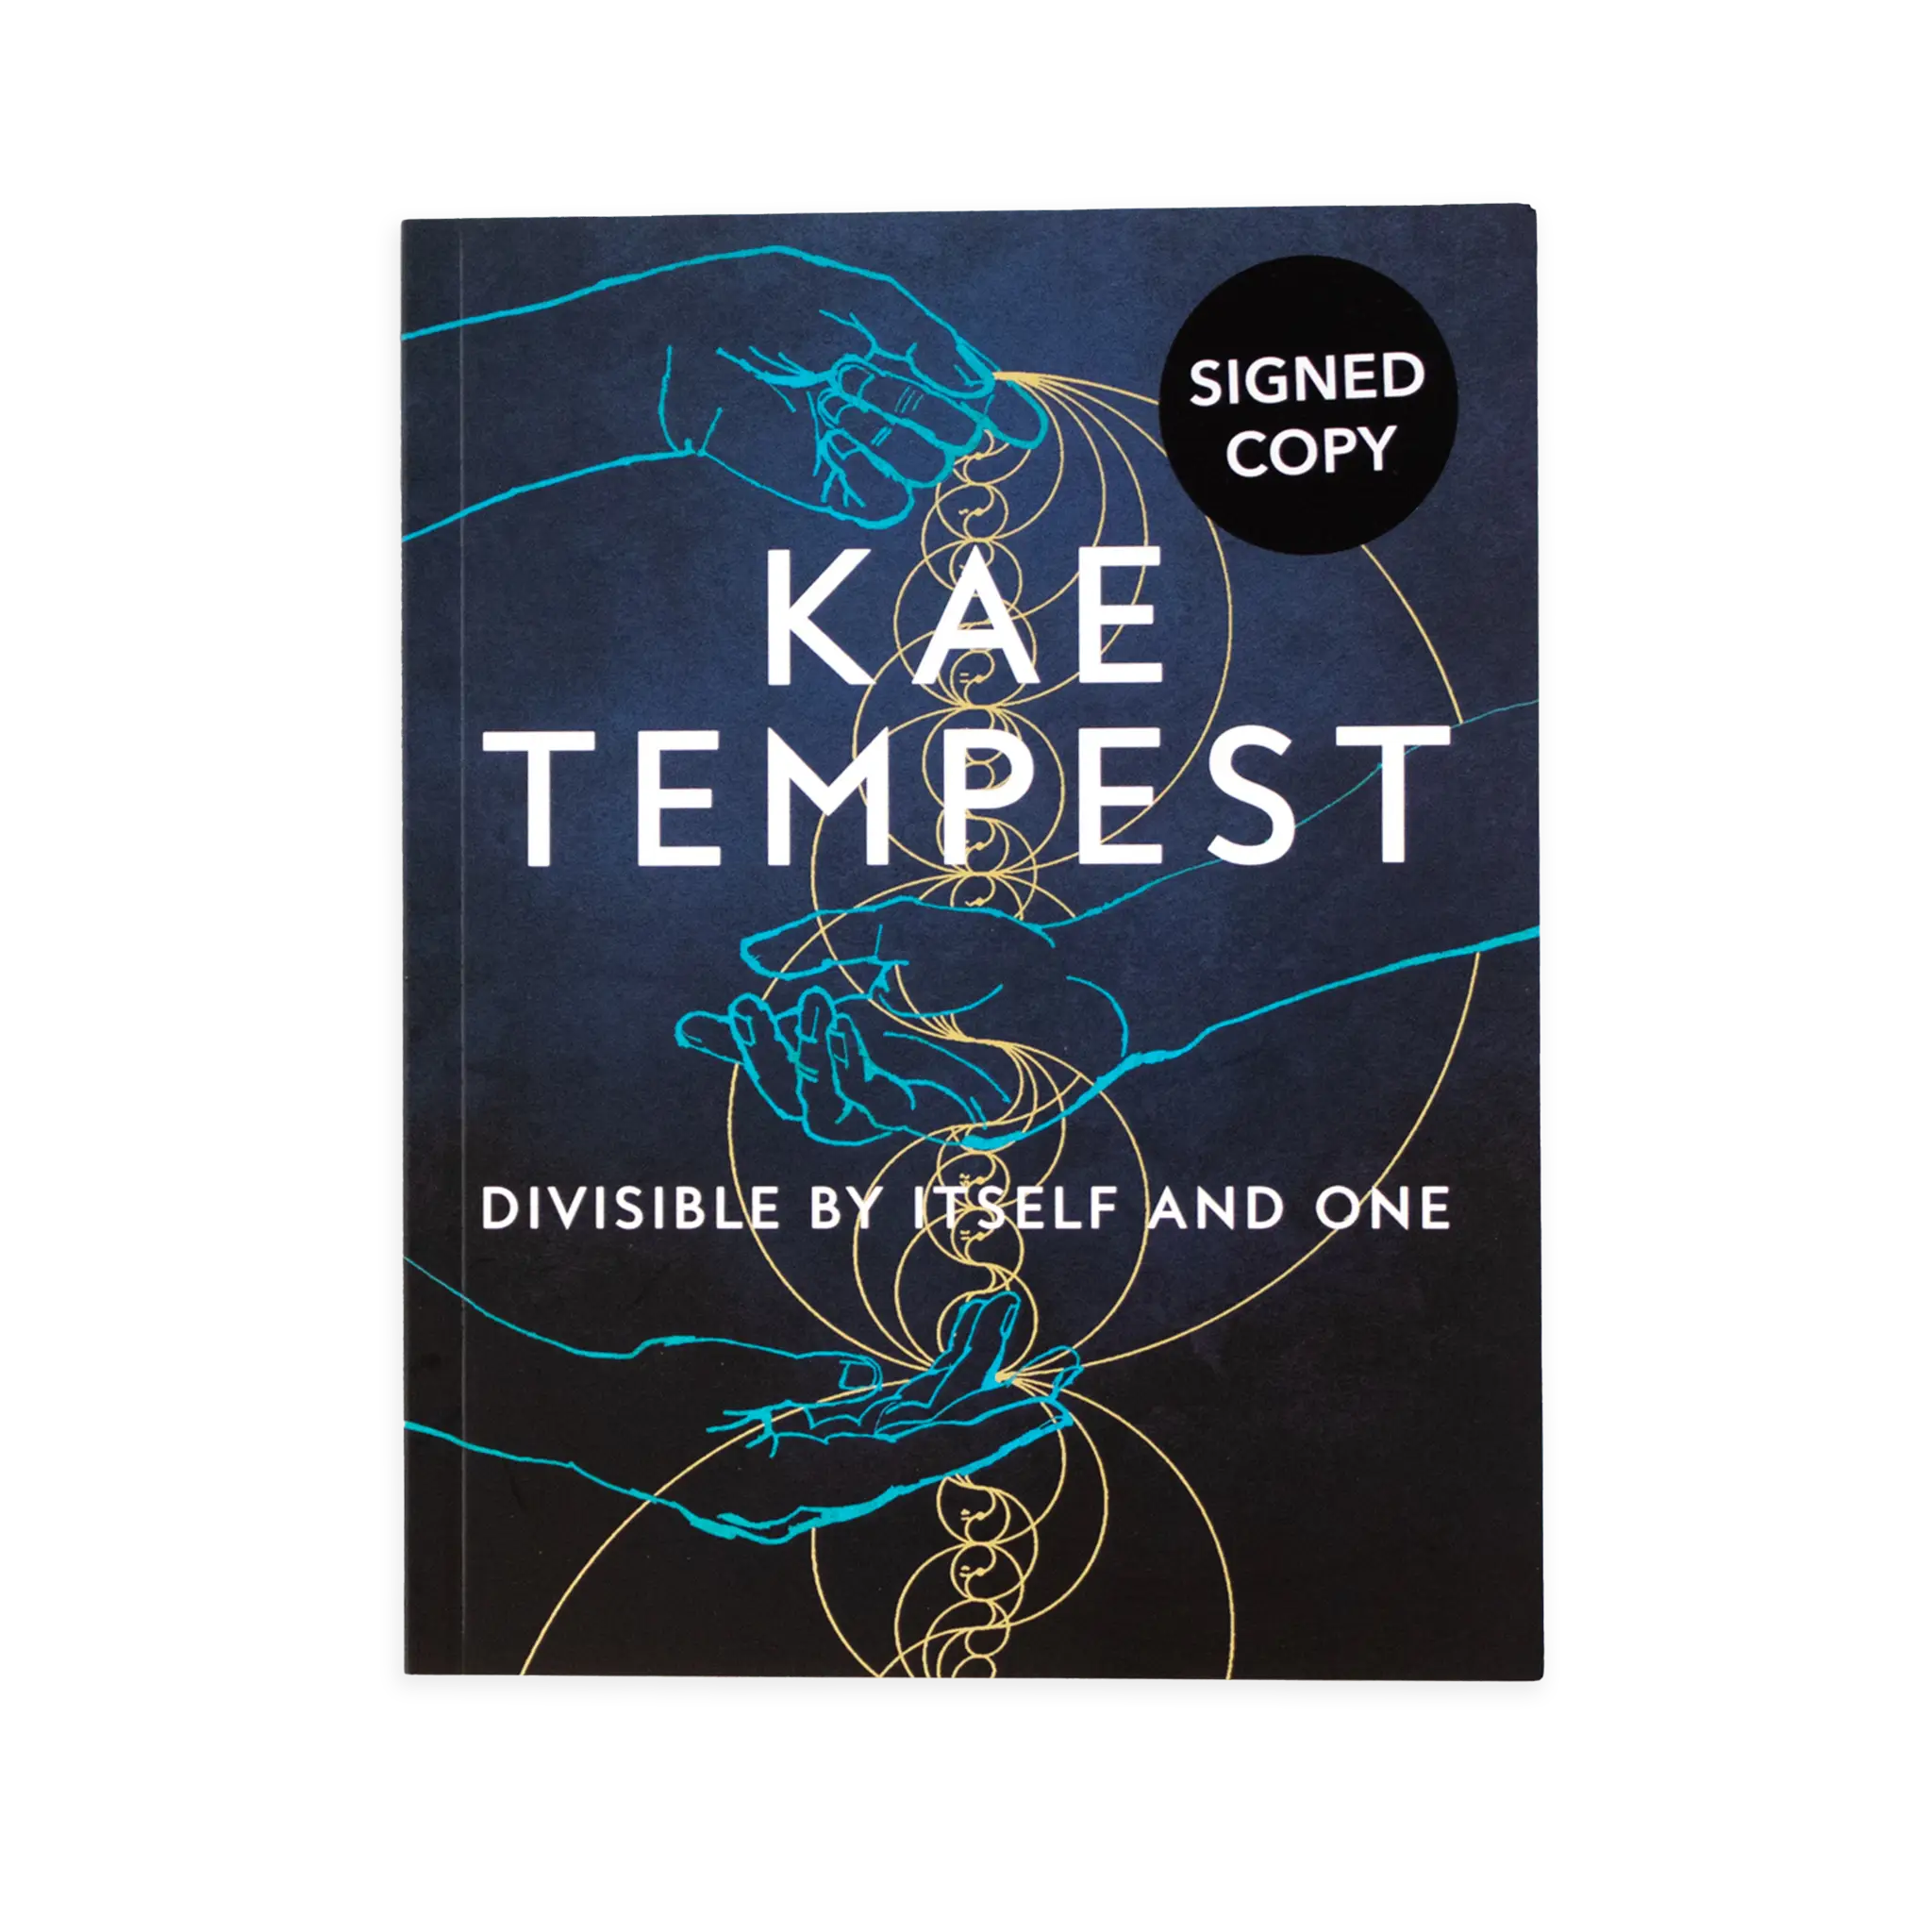 Kae Tempest - Divisible By Itself and One artwork